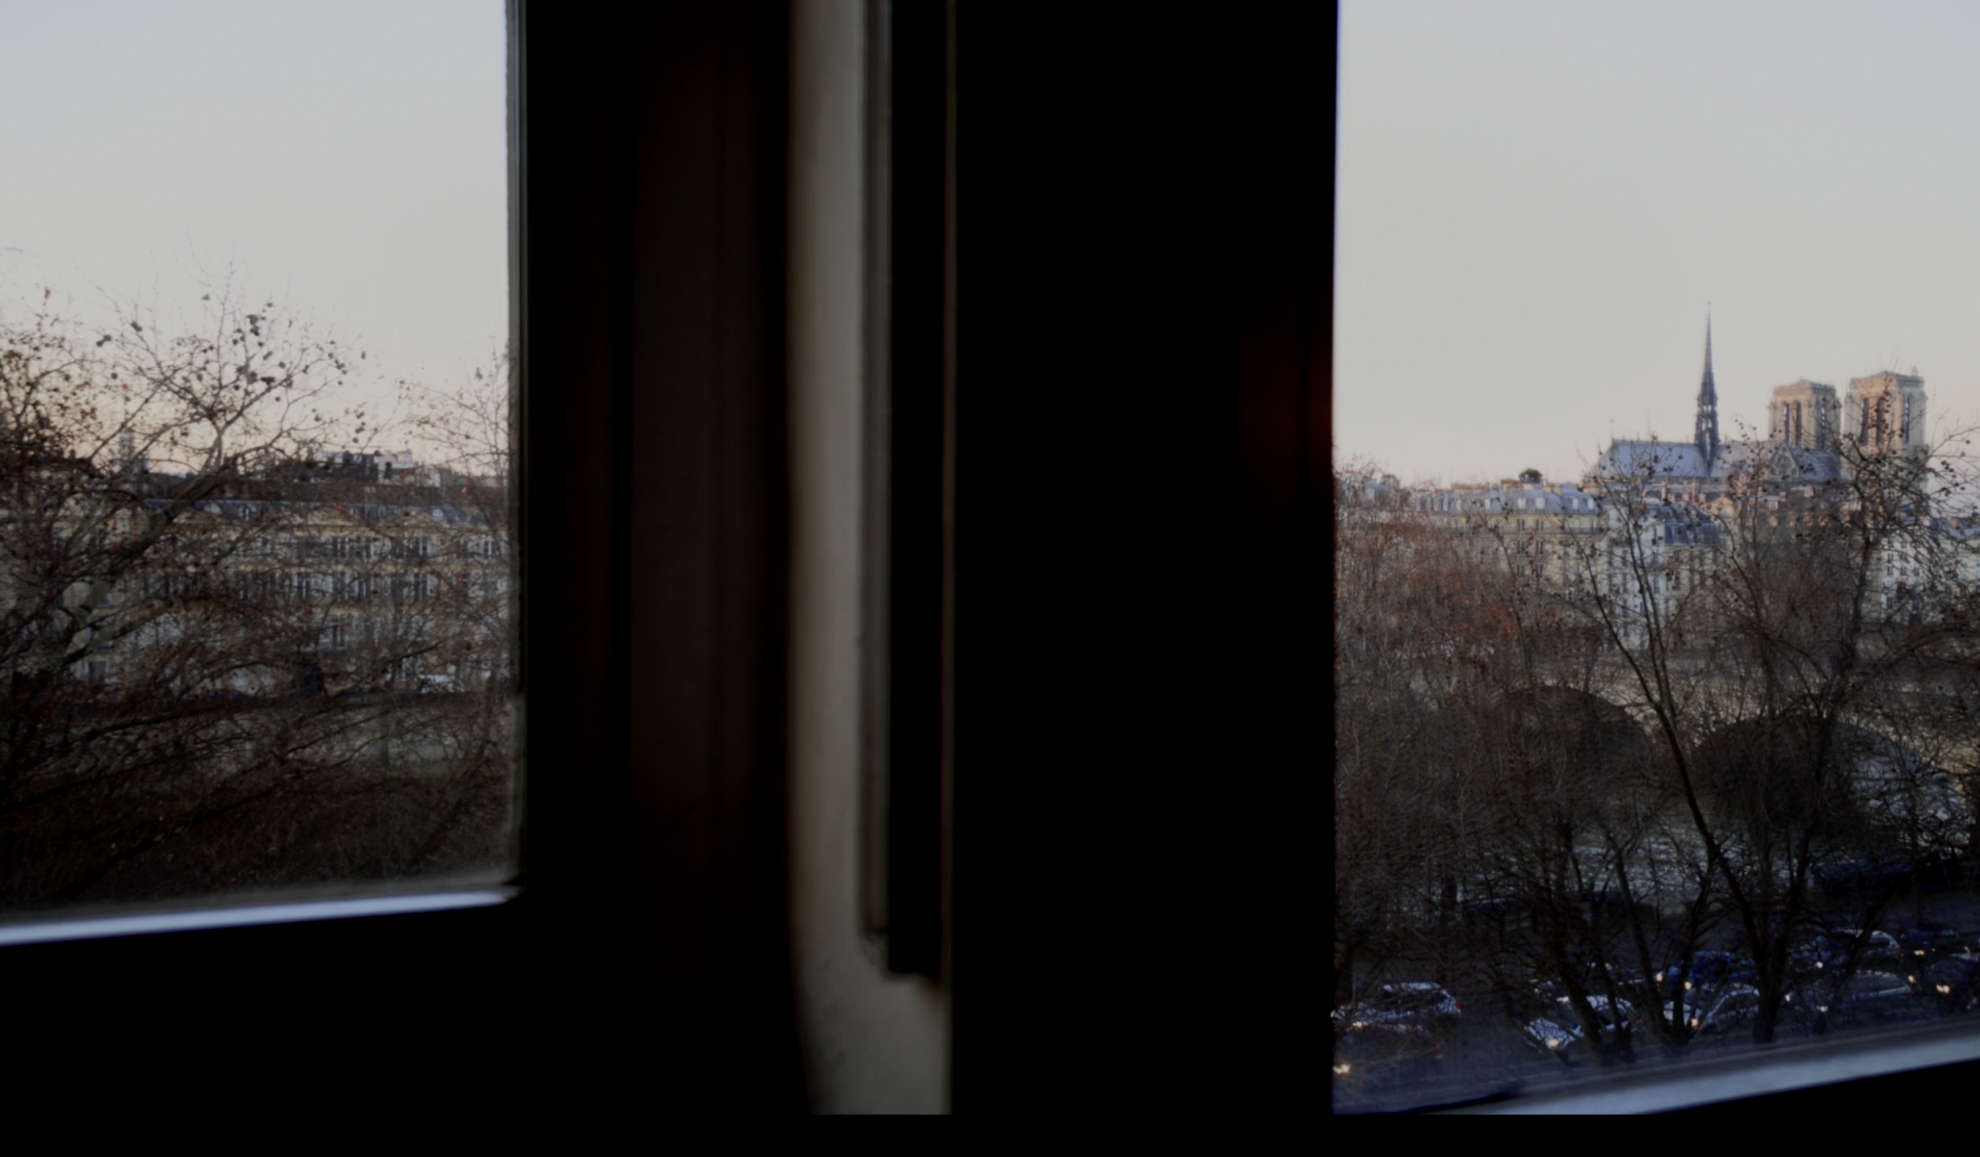 A still from a film that shows a view out a window of Paris, showing the Notre Dame in the distance.